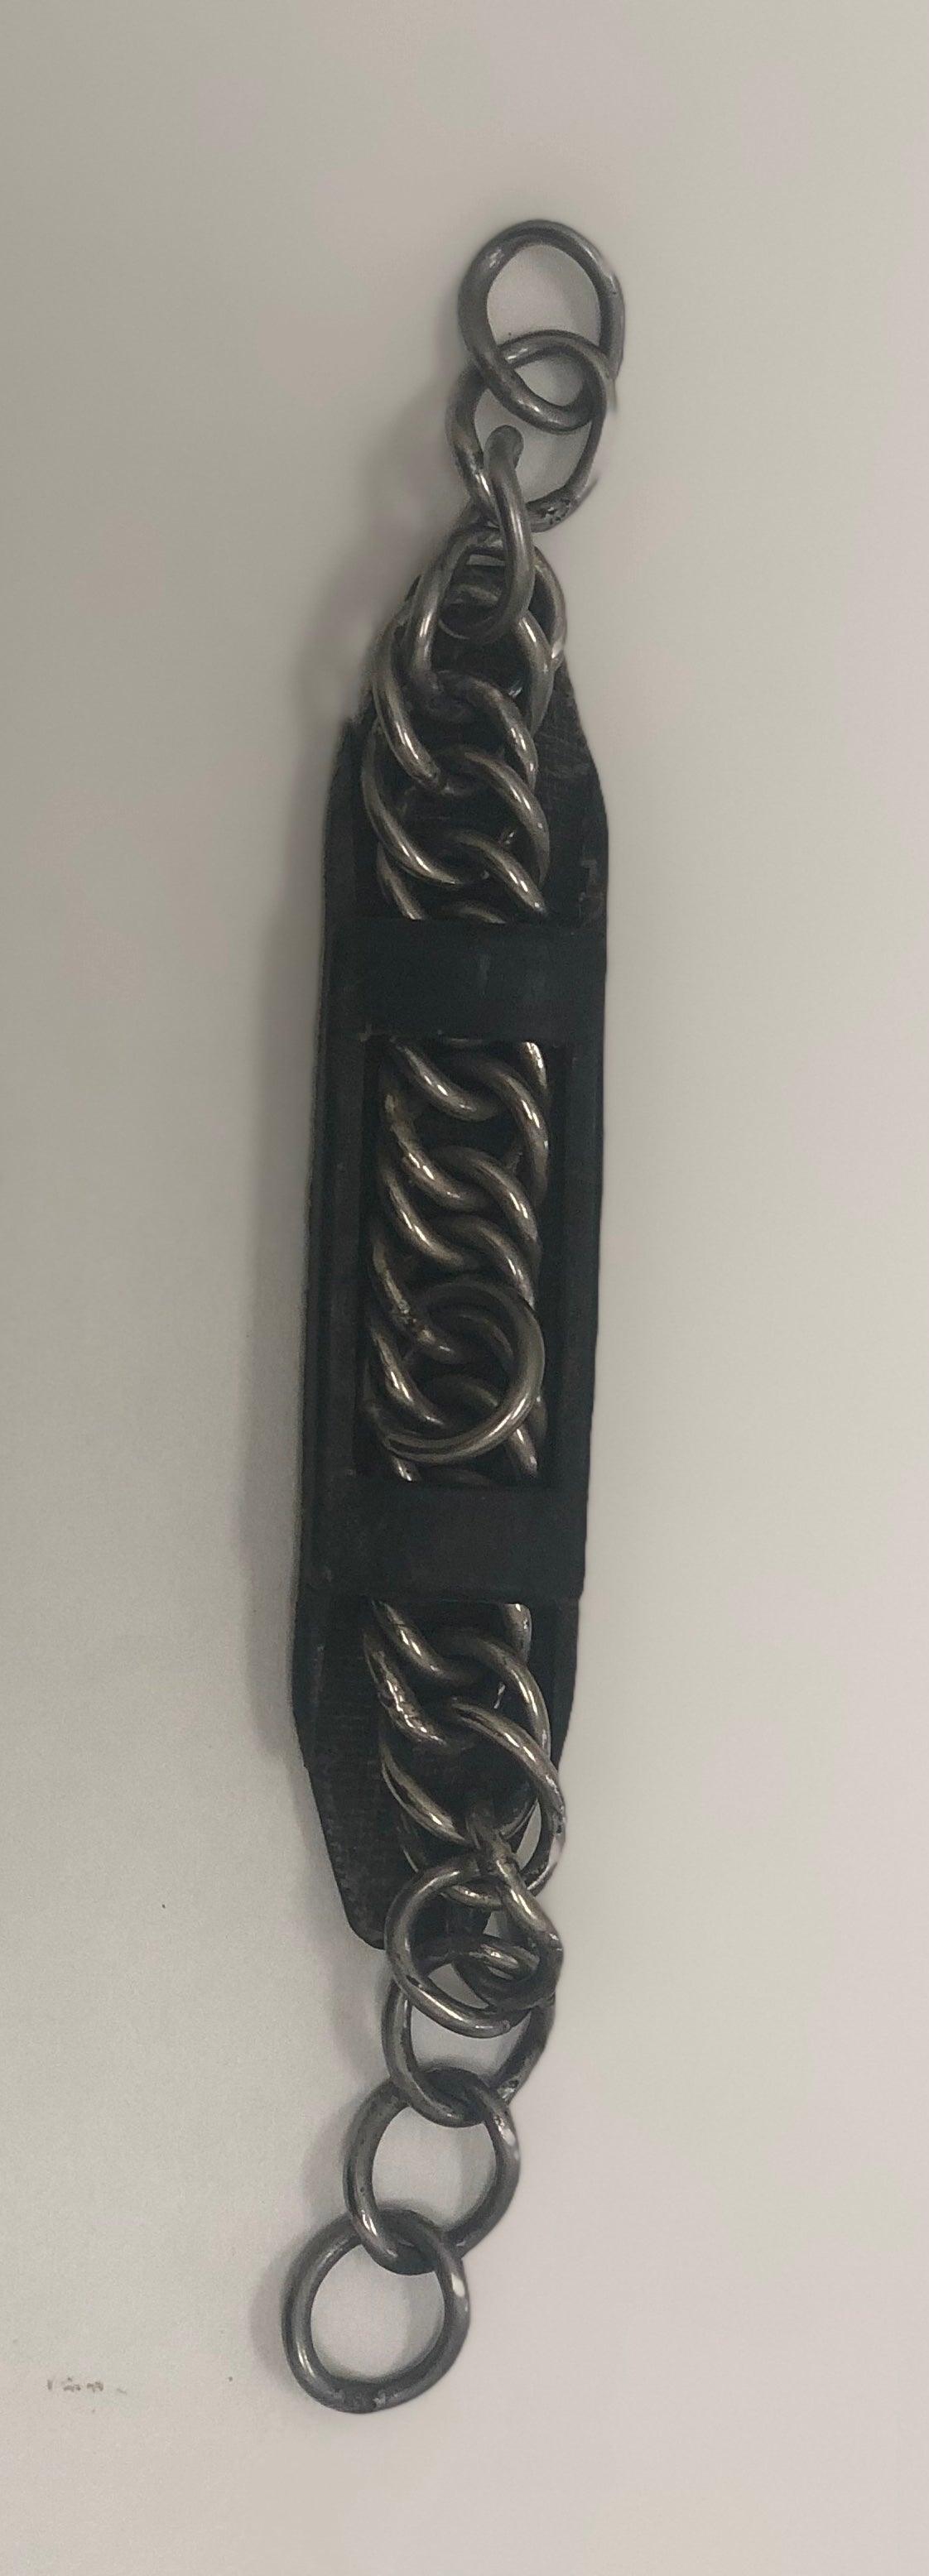 Fine Used Curb Chain With Rubber Chain Guard